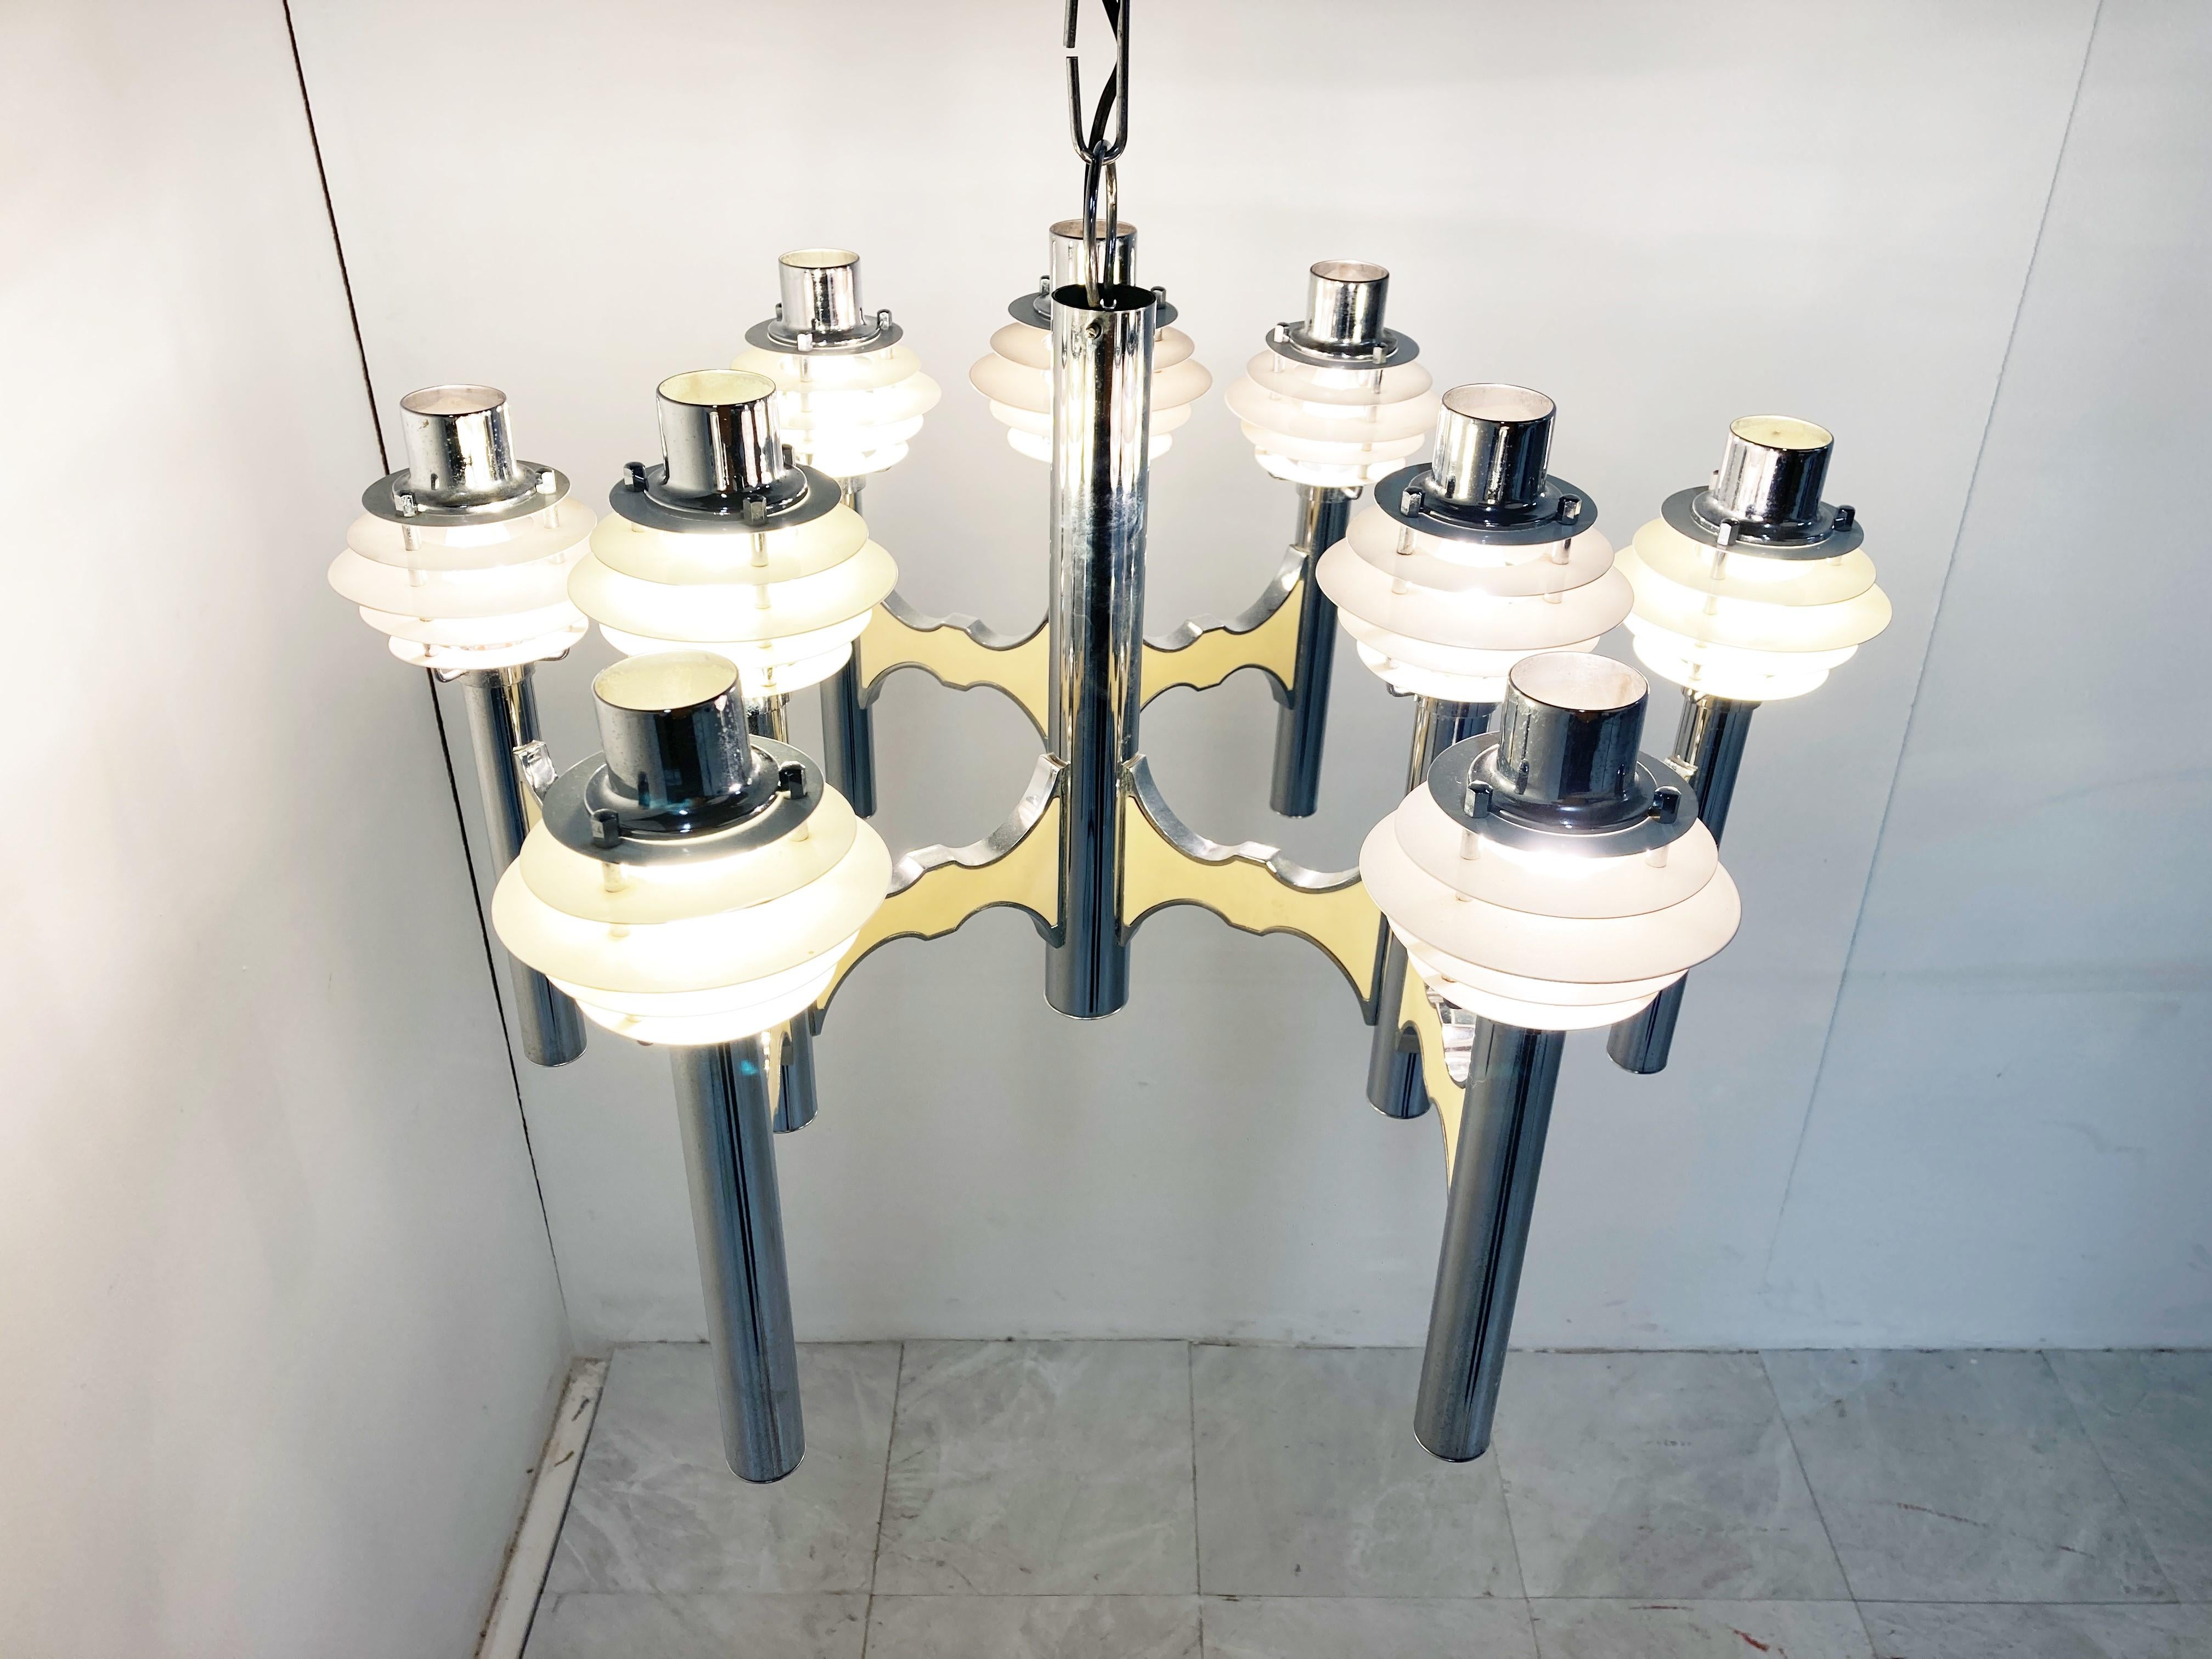 Chrome space age 'saturn' design chandelier with beige lacquer arms and enamelled saturn like lamp shades.

Designed by Gaetano Sciolari.

9 Lightpoints working with regular E14 light bulbs

Good condition

1970s -